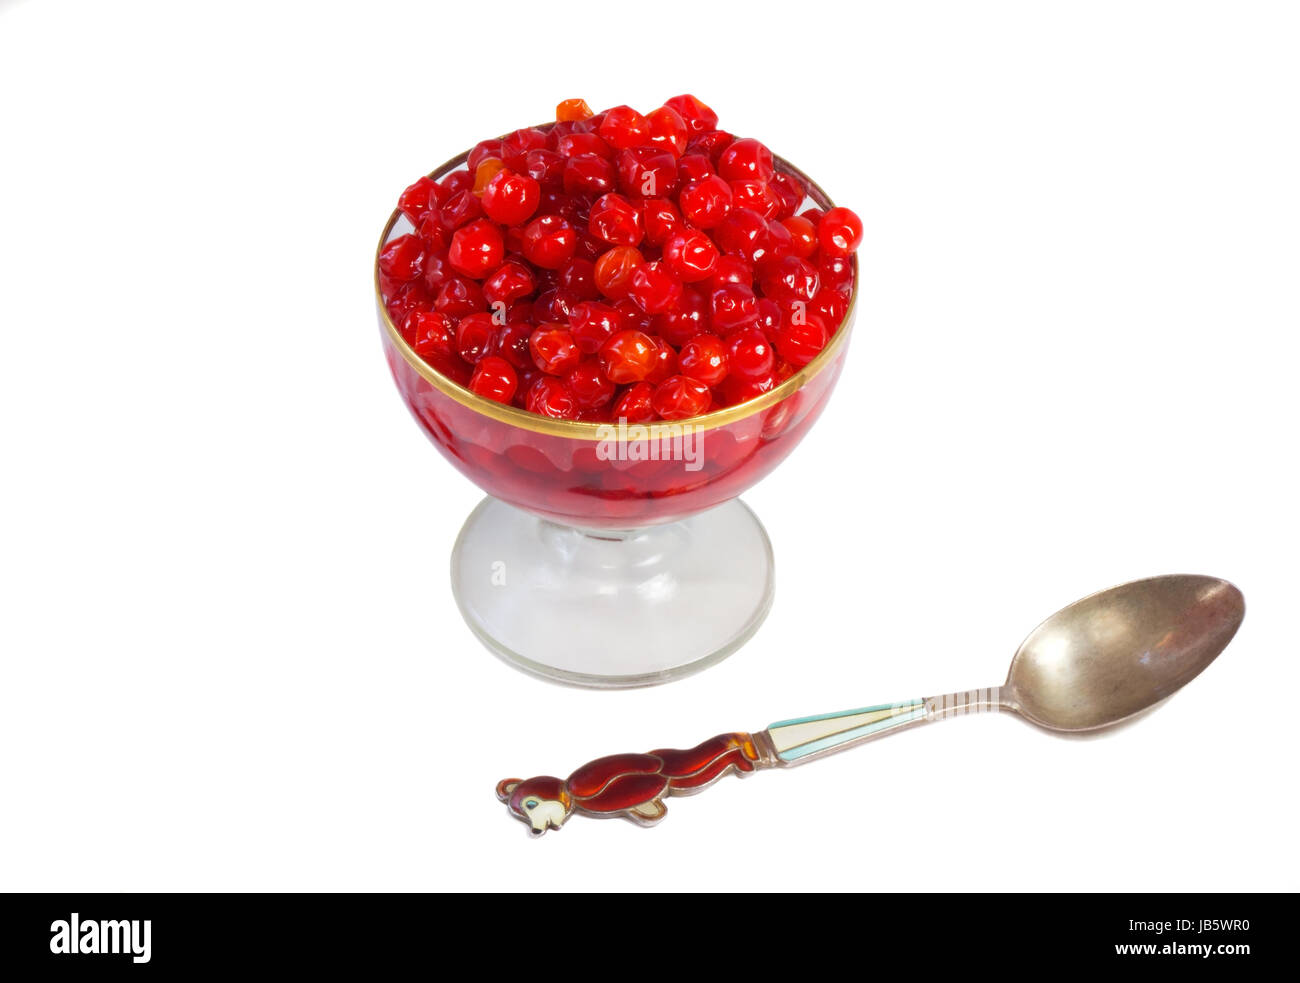 Bright red berries in a crystal vase filled with sugar syrup. Presented on a white background. Stock Photo